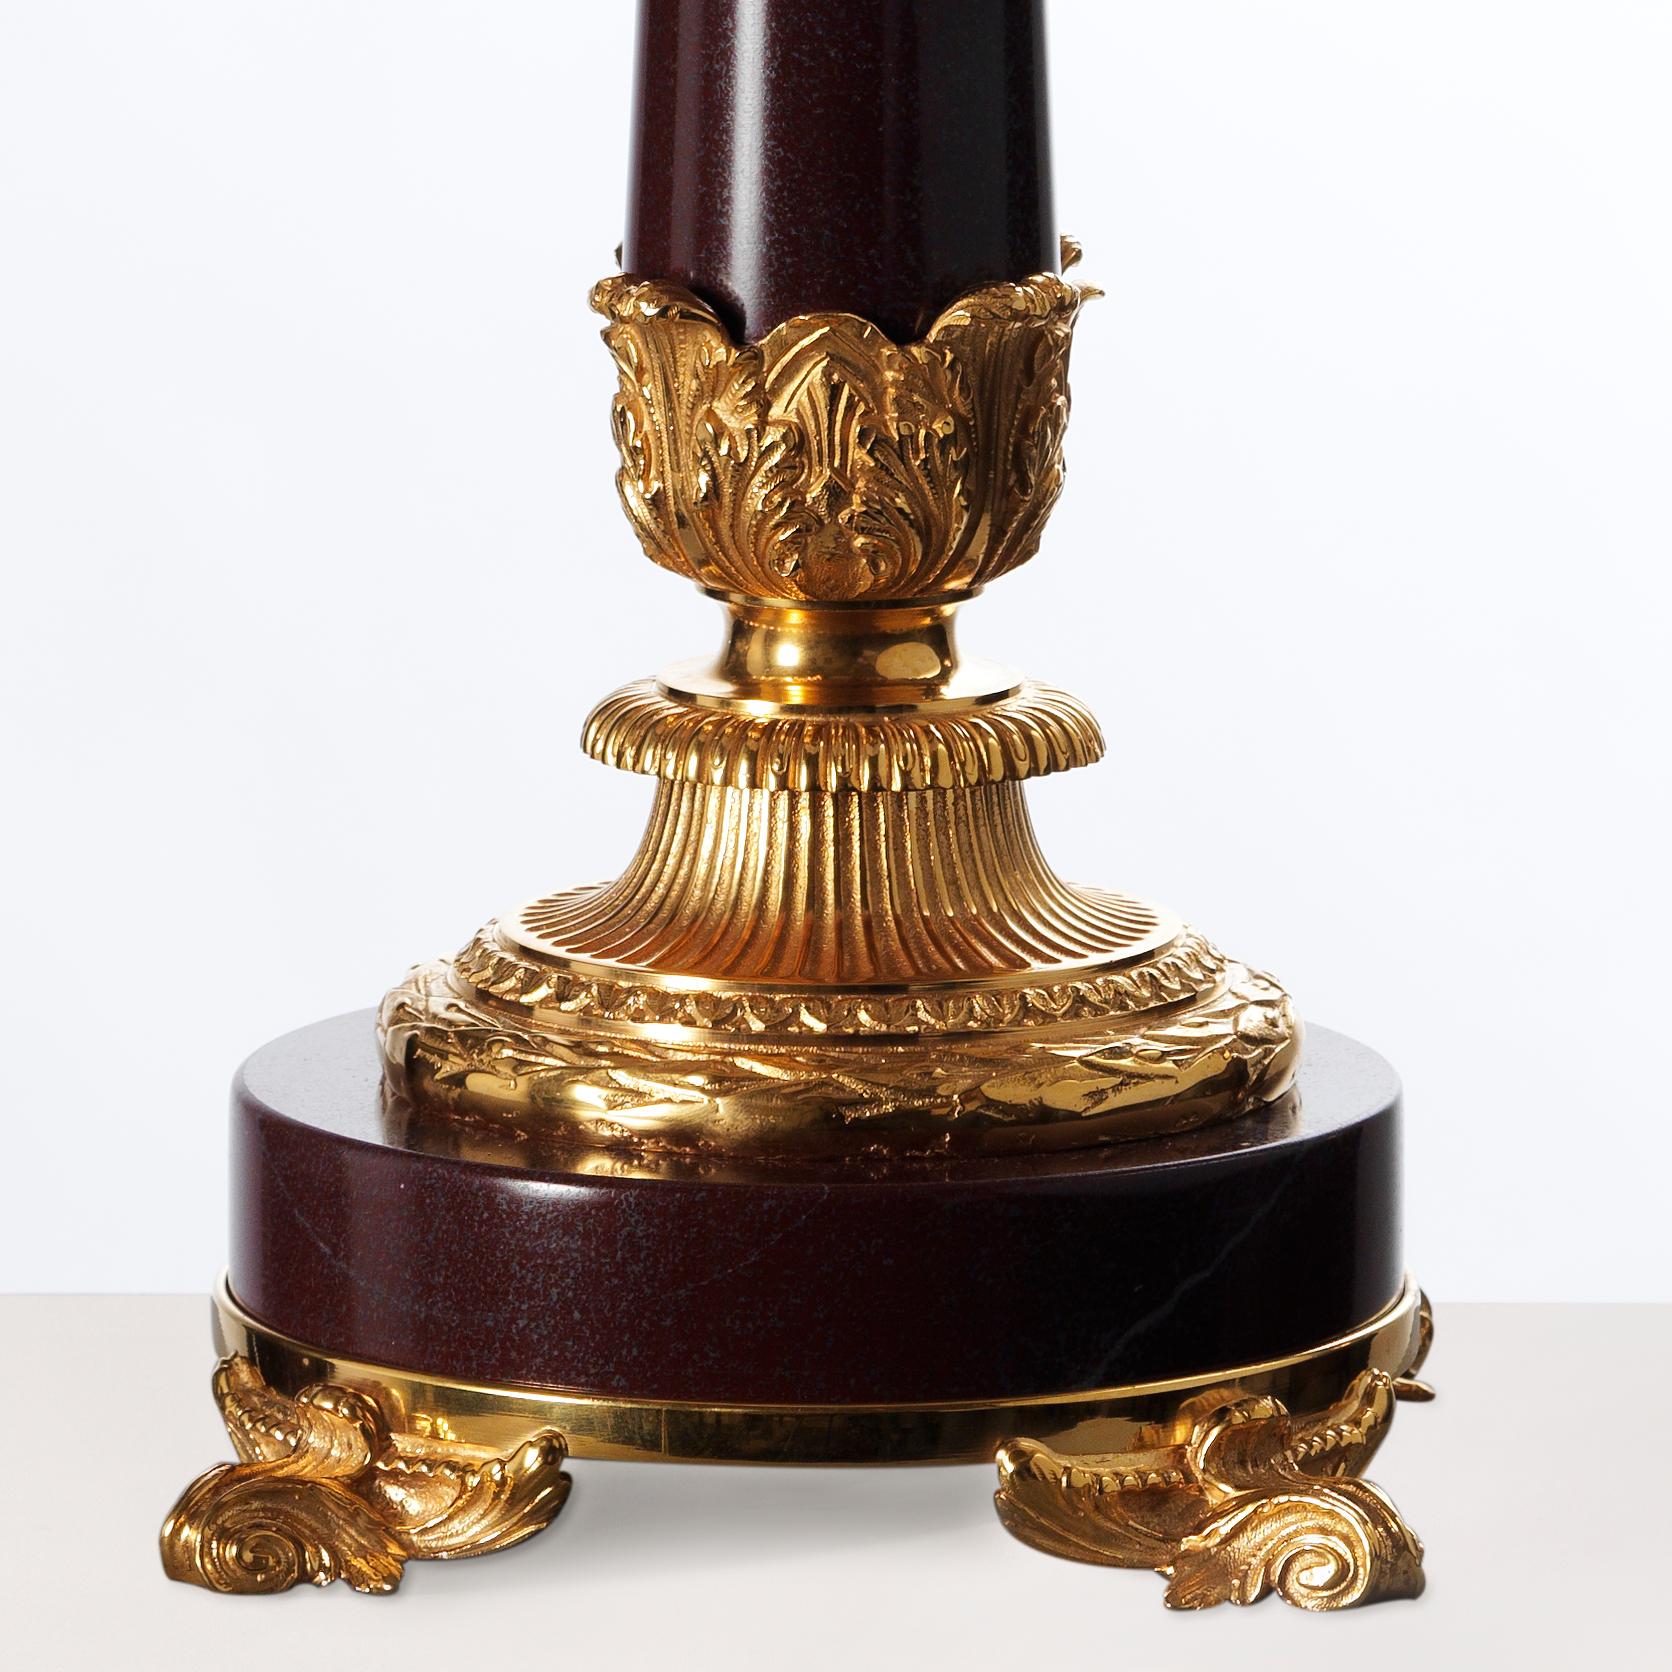 This elegant Louis XVI style candelabra by Gherardo Degli Albizzi features high quality gilt bronze decoration such as the fully chiseled Corinthian style capital or the base with a blossom motif and the bronze profile with foliate foot motif. Over